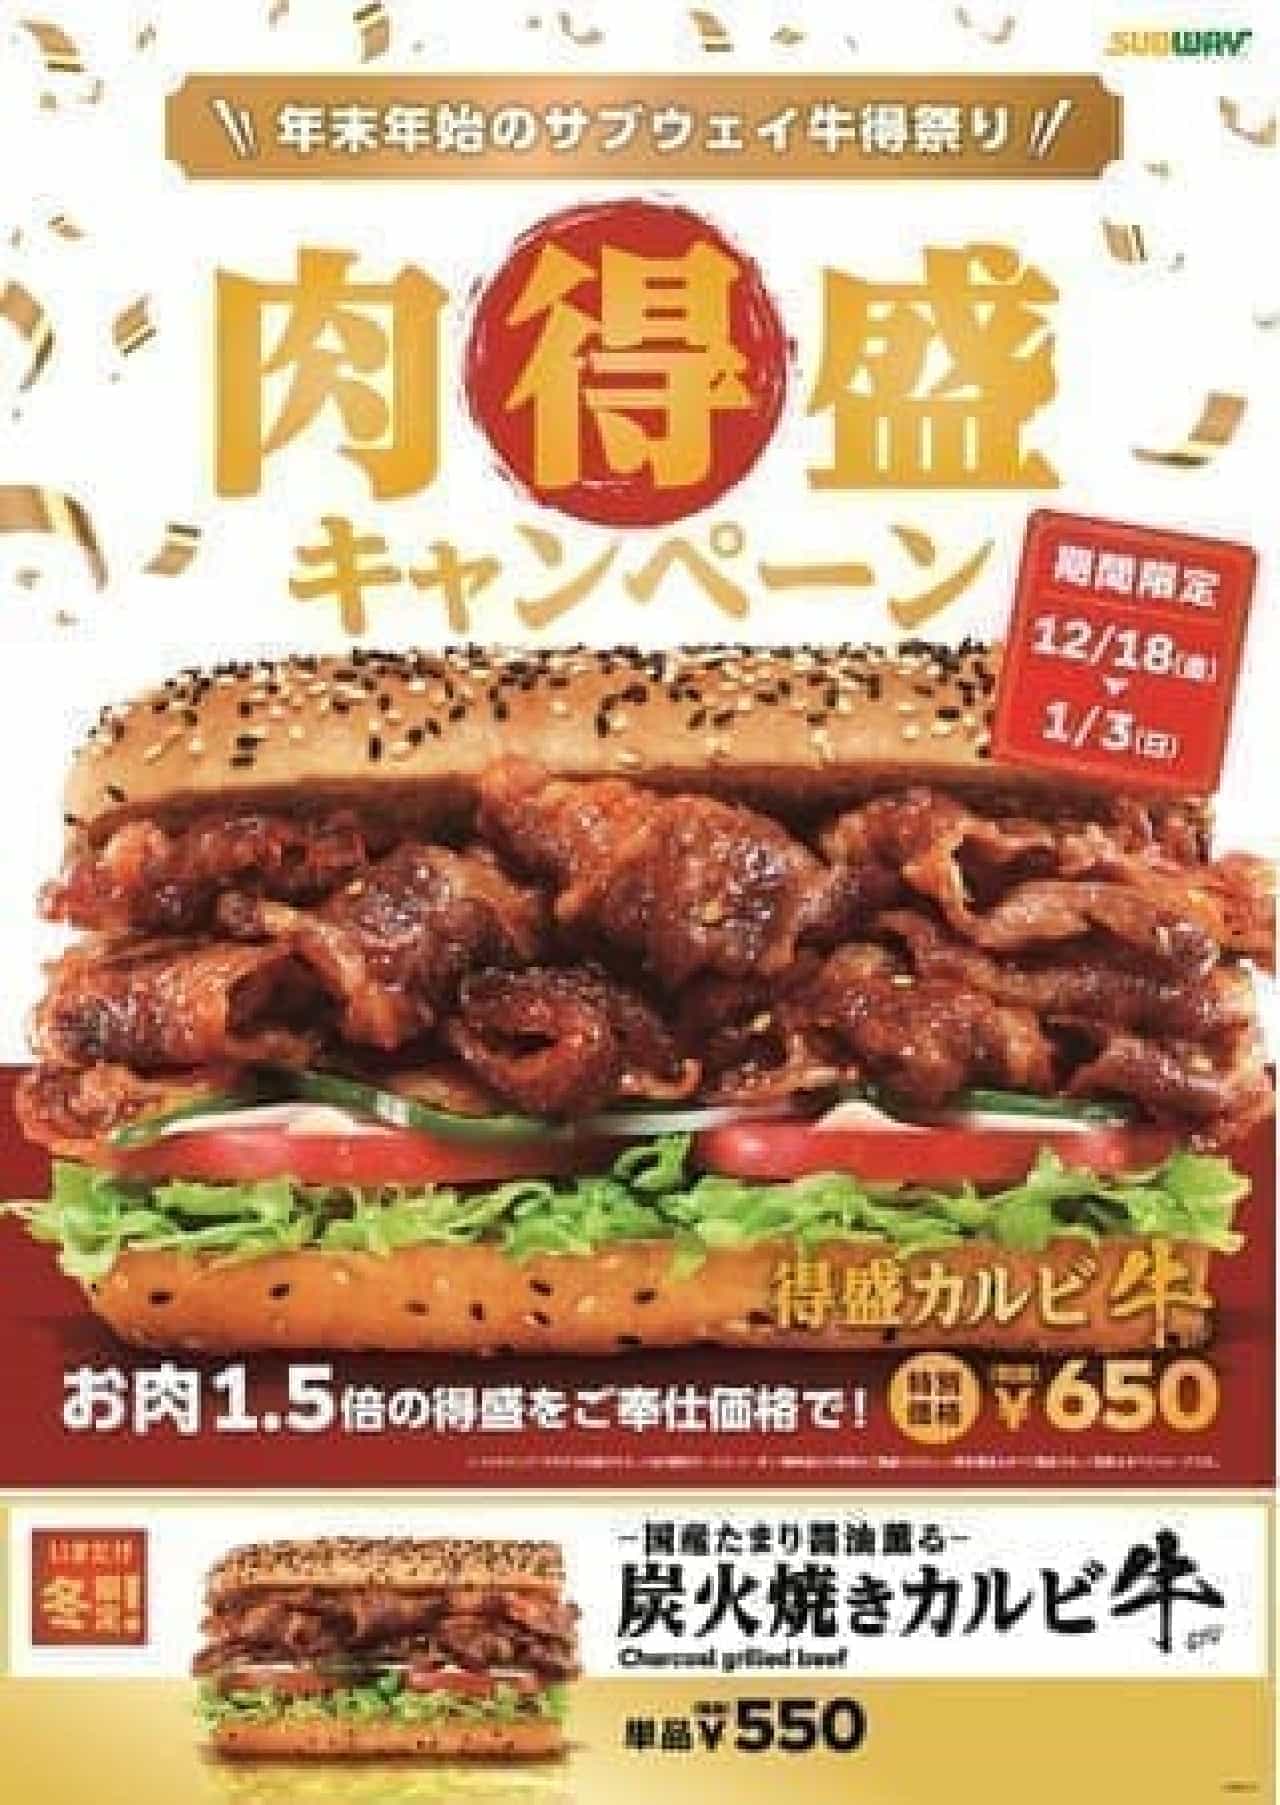 Subway "Charcoal Grilled Kalbi Beef Meat Gain Campaign".